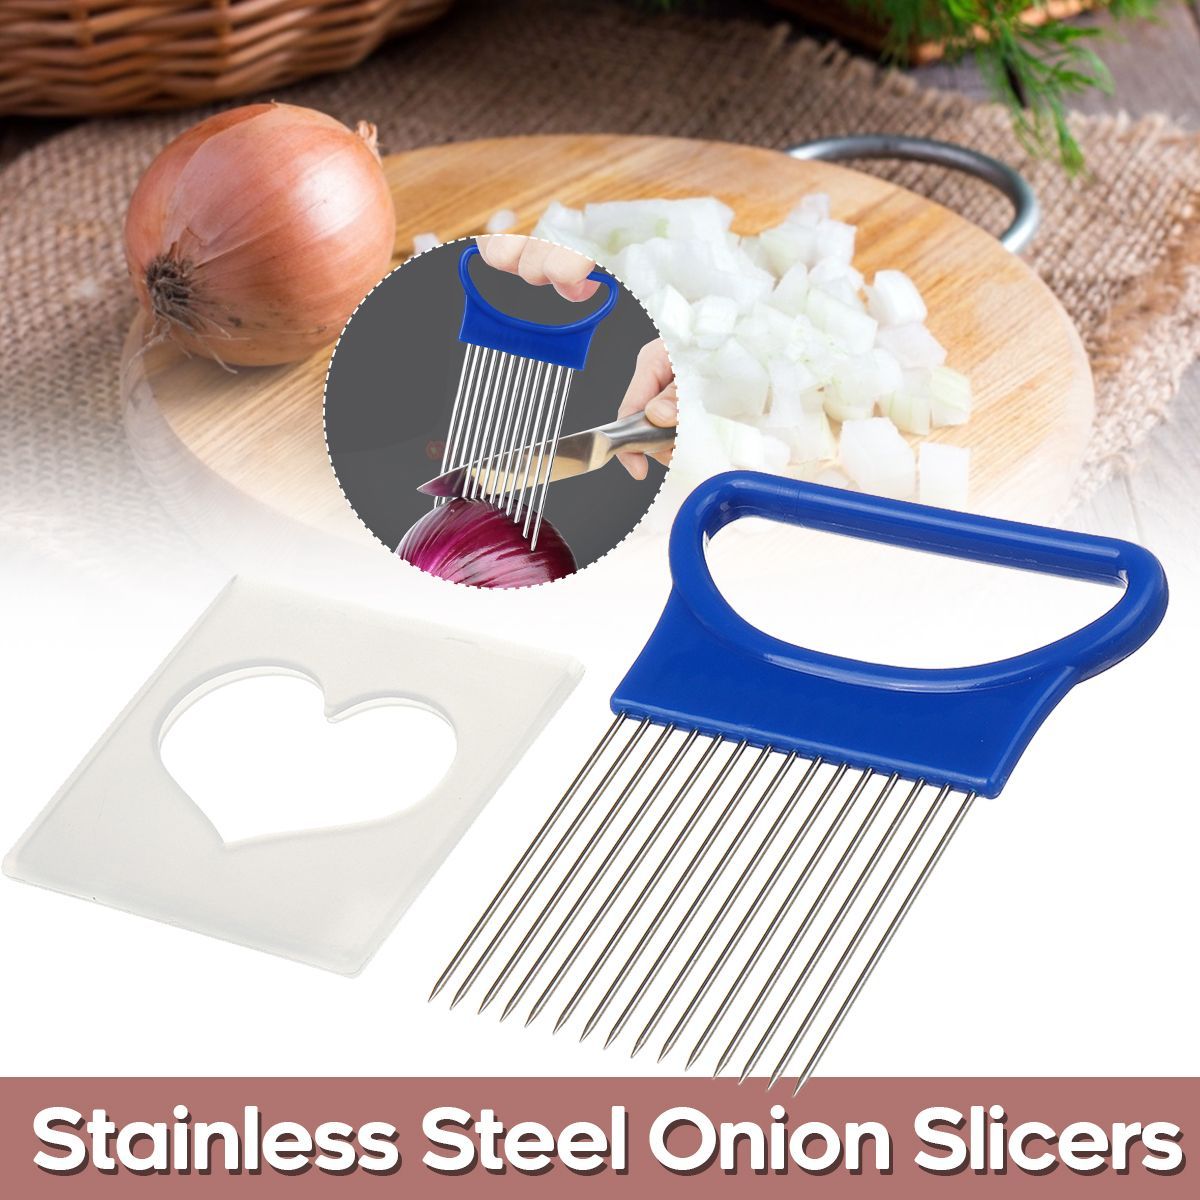 Stainless-Steel-onion-Slicers-Safe-Fork-Kitchen-Tool-Tomato-Onion-Vegetables-Slicer-Cutting-Aid-Hold-1587268